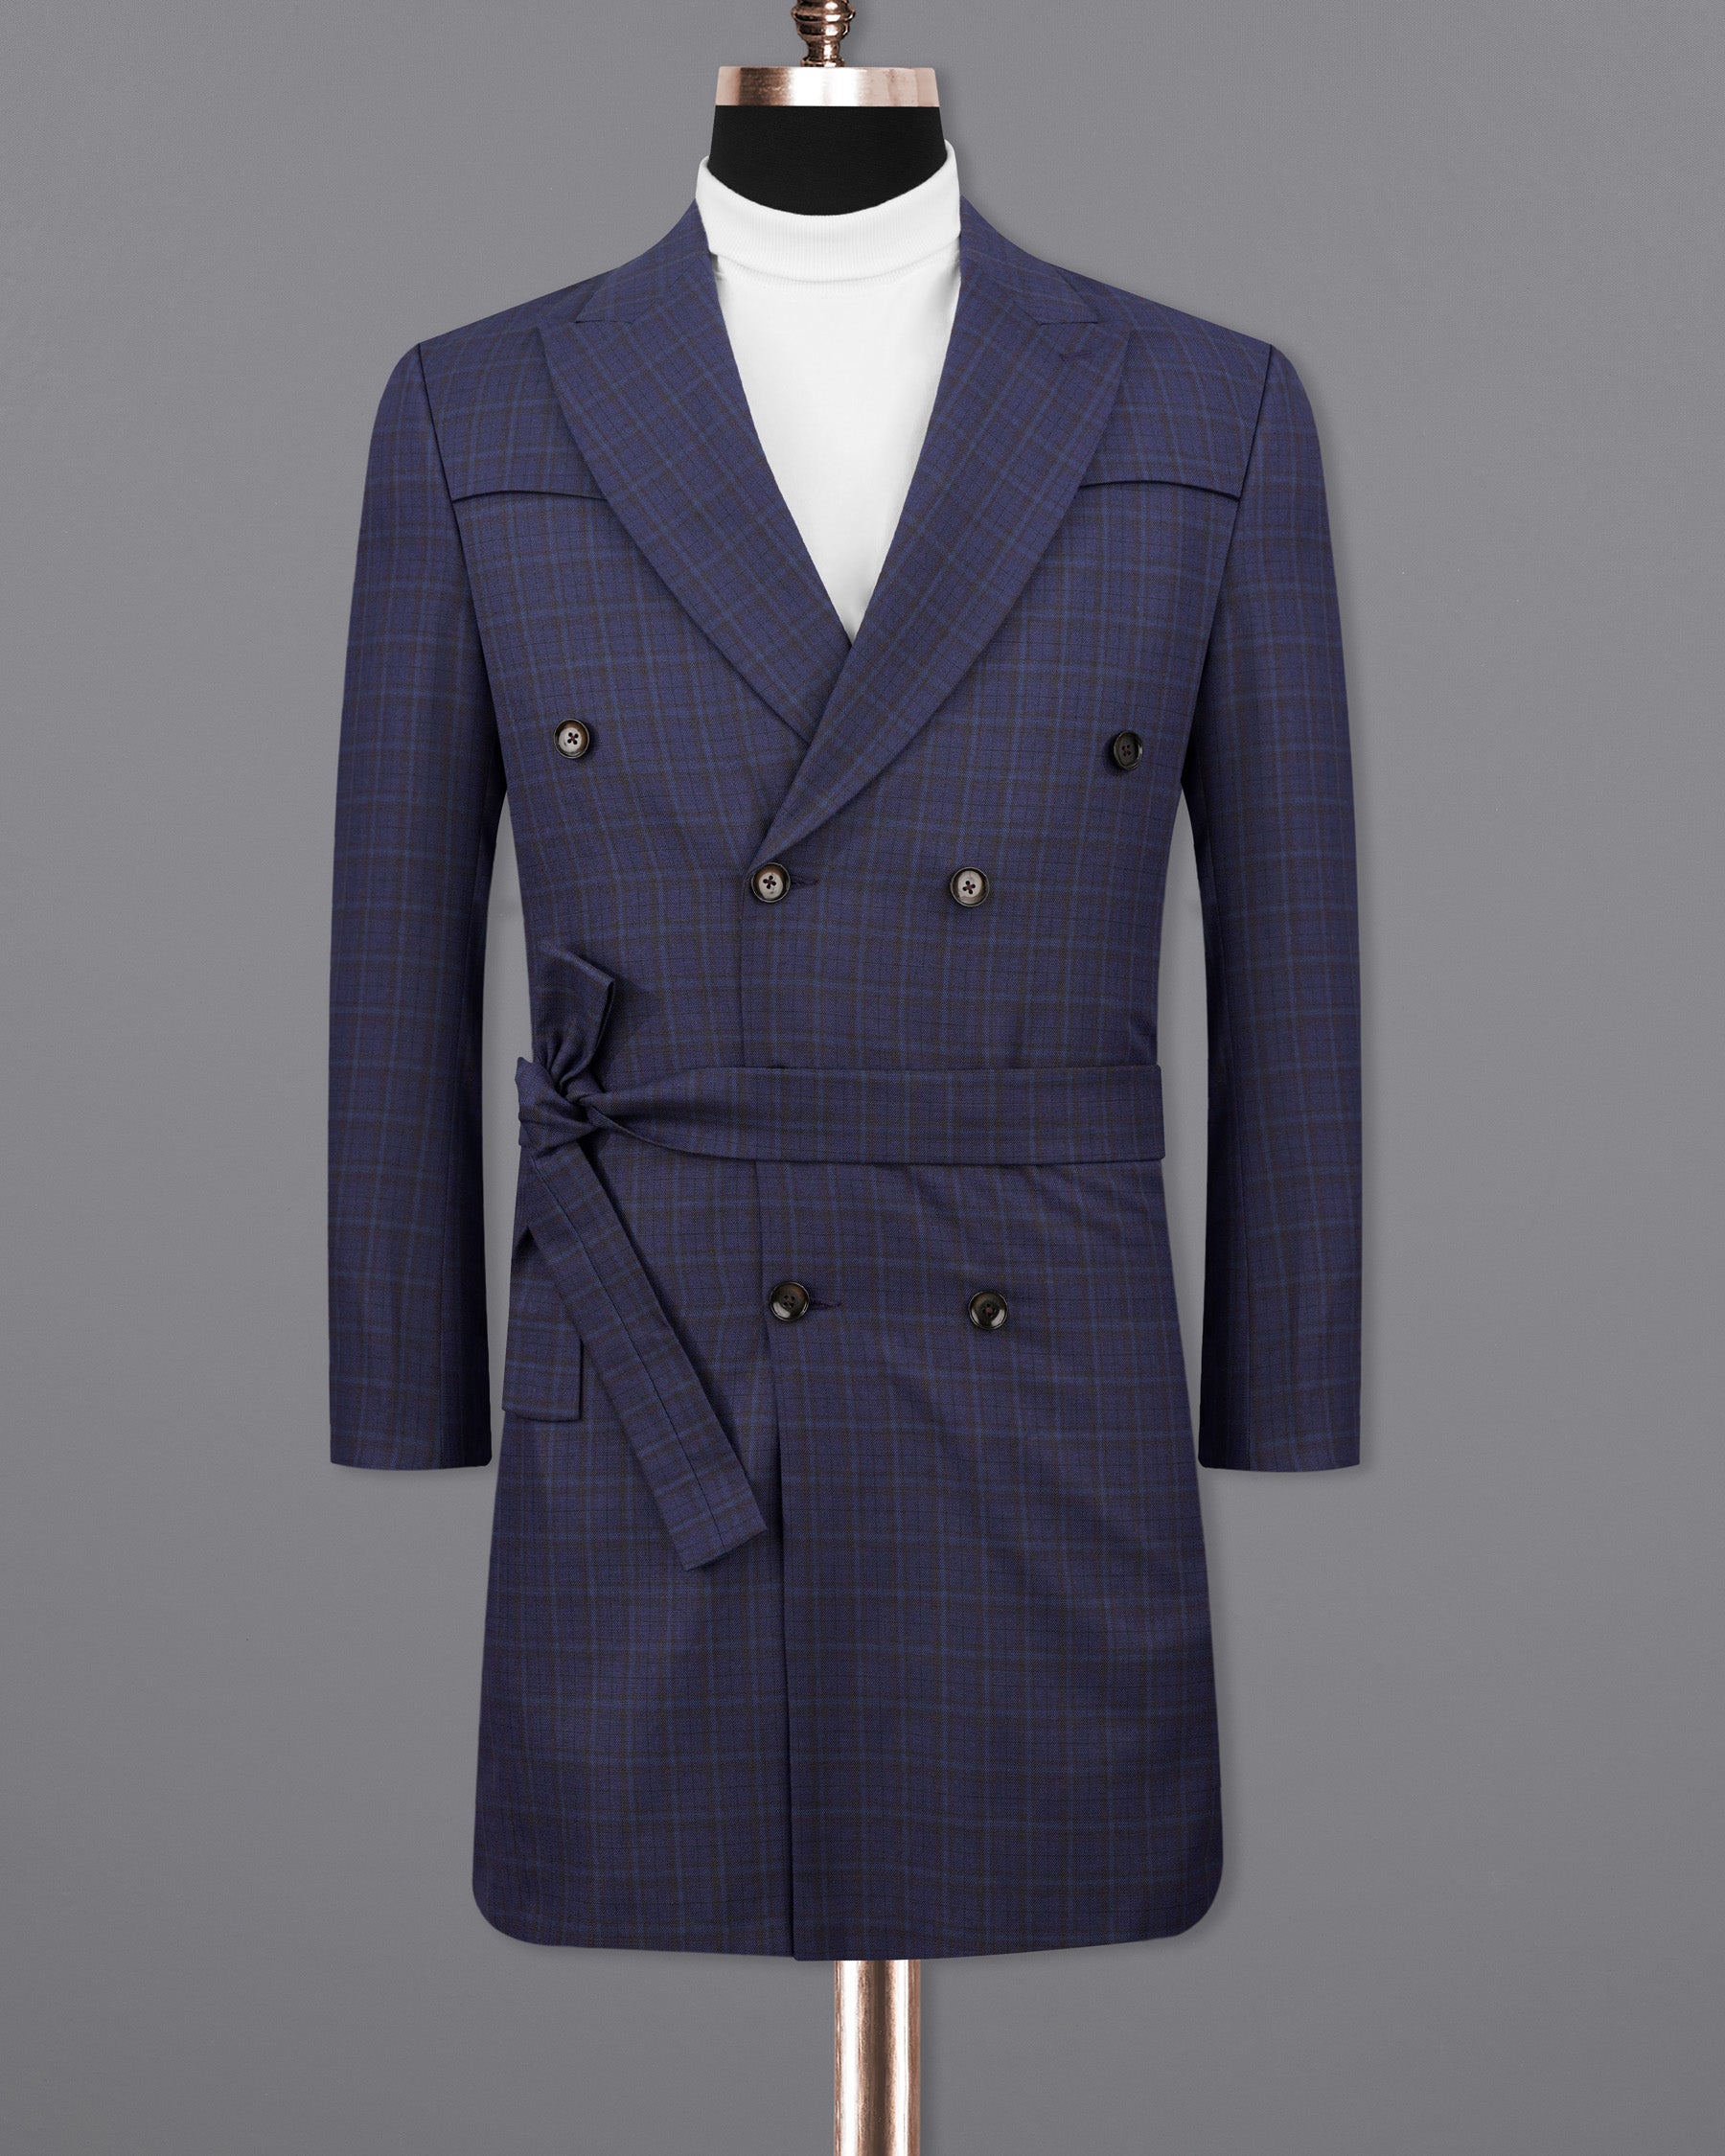 Martinique blue Subtle Checkered Double Breasted with Belt Closure Designer Trench Coat TCB2112-DB-D35-36, TCB2112-DB-D35-38, TCB2112-DB-D35-40, TCB2112-DB-D35-42, TCB2112-DB-D35-44, TCB2112-DB-D35-46, TCB2112-DB-D35-48, TCB2112-DB-D35-50, TCB2112-DB-D35-52, TCB2112-DB-D35-54, TCB2112-DB-D35-56, TCB2112-DB-D35-58, TCB2112-DB-D35-60